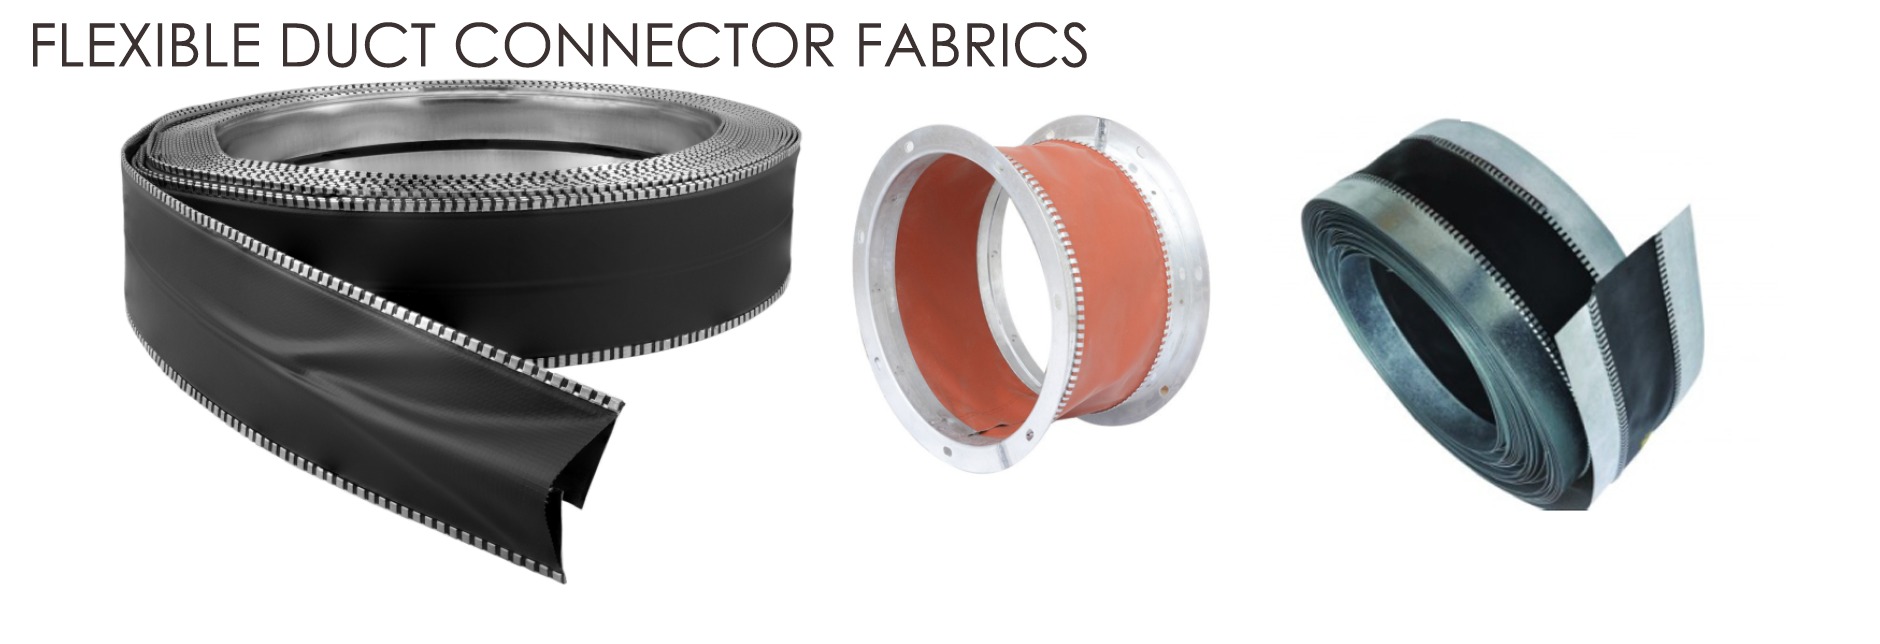 FLEXIBLE DUCT CONNECTOR FABRICS